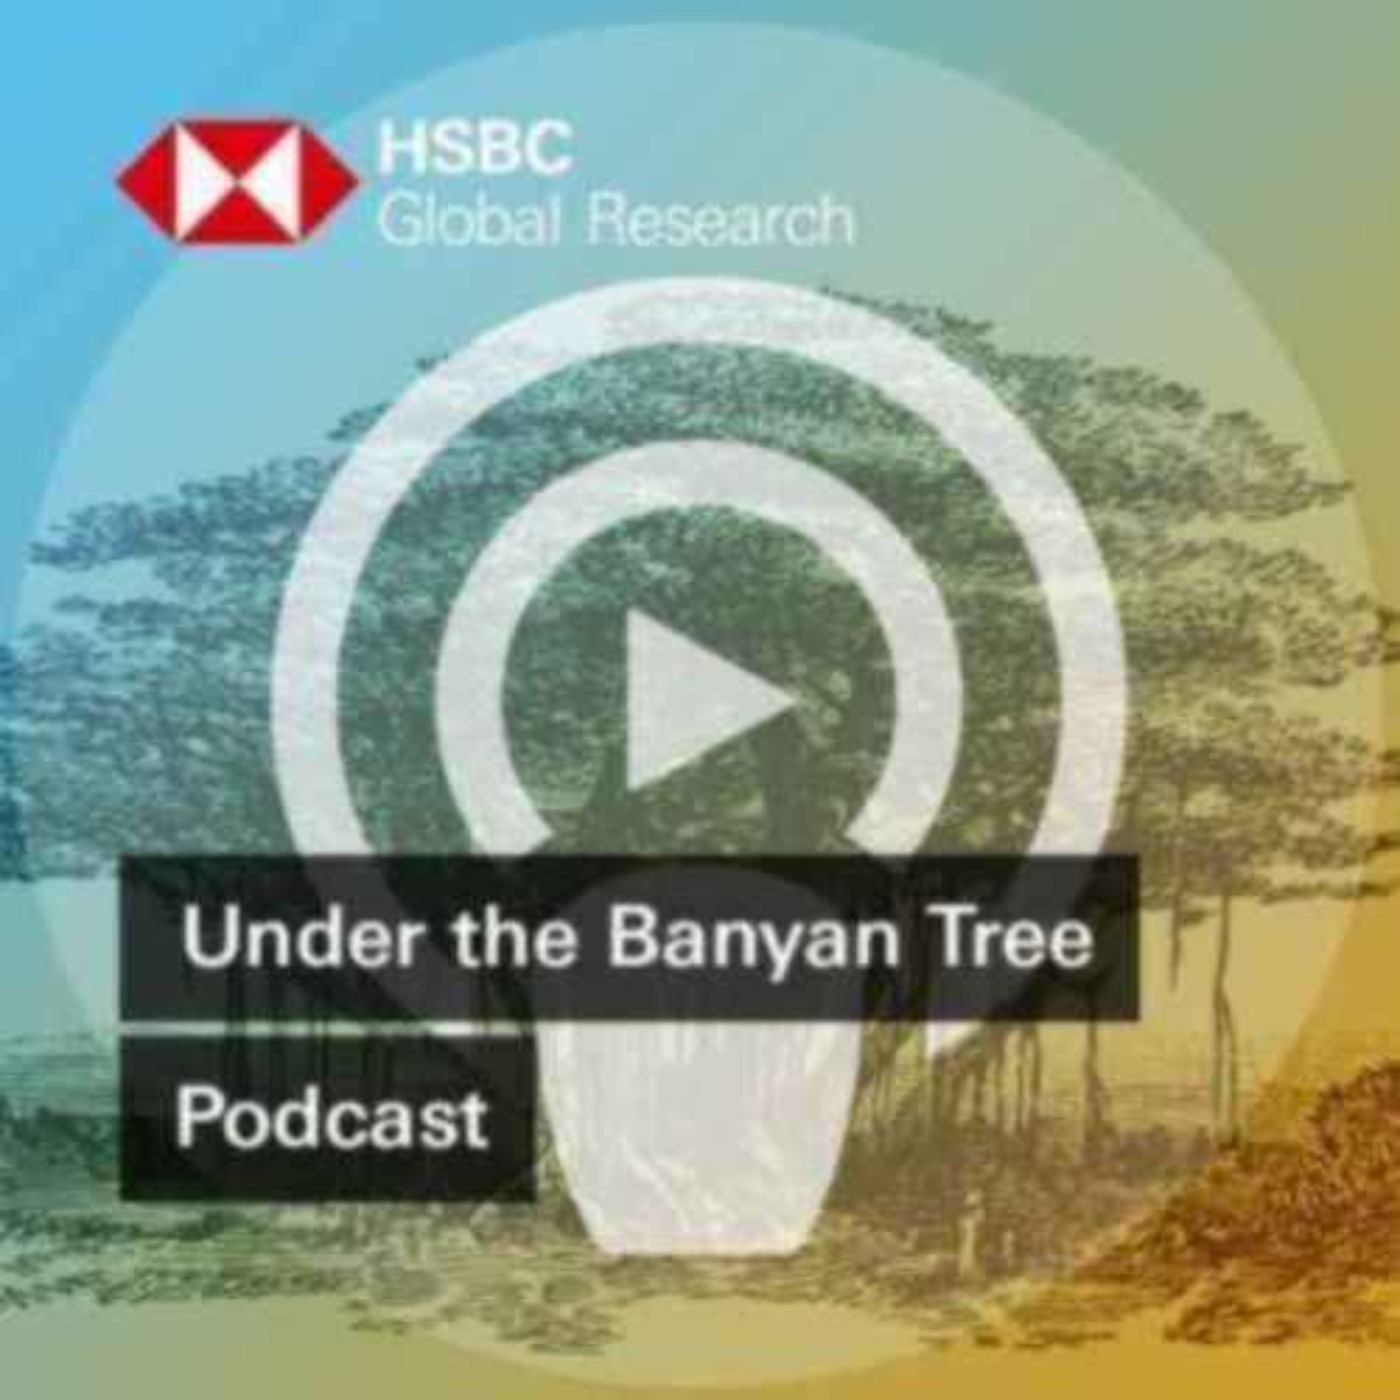 Under the Banyan Tree - A sentimental catch-up